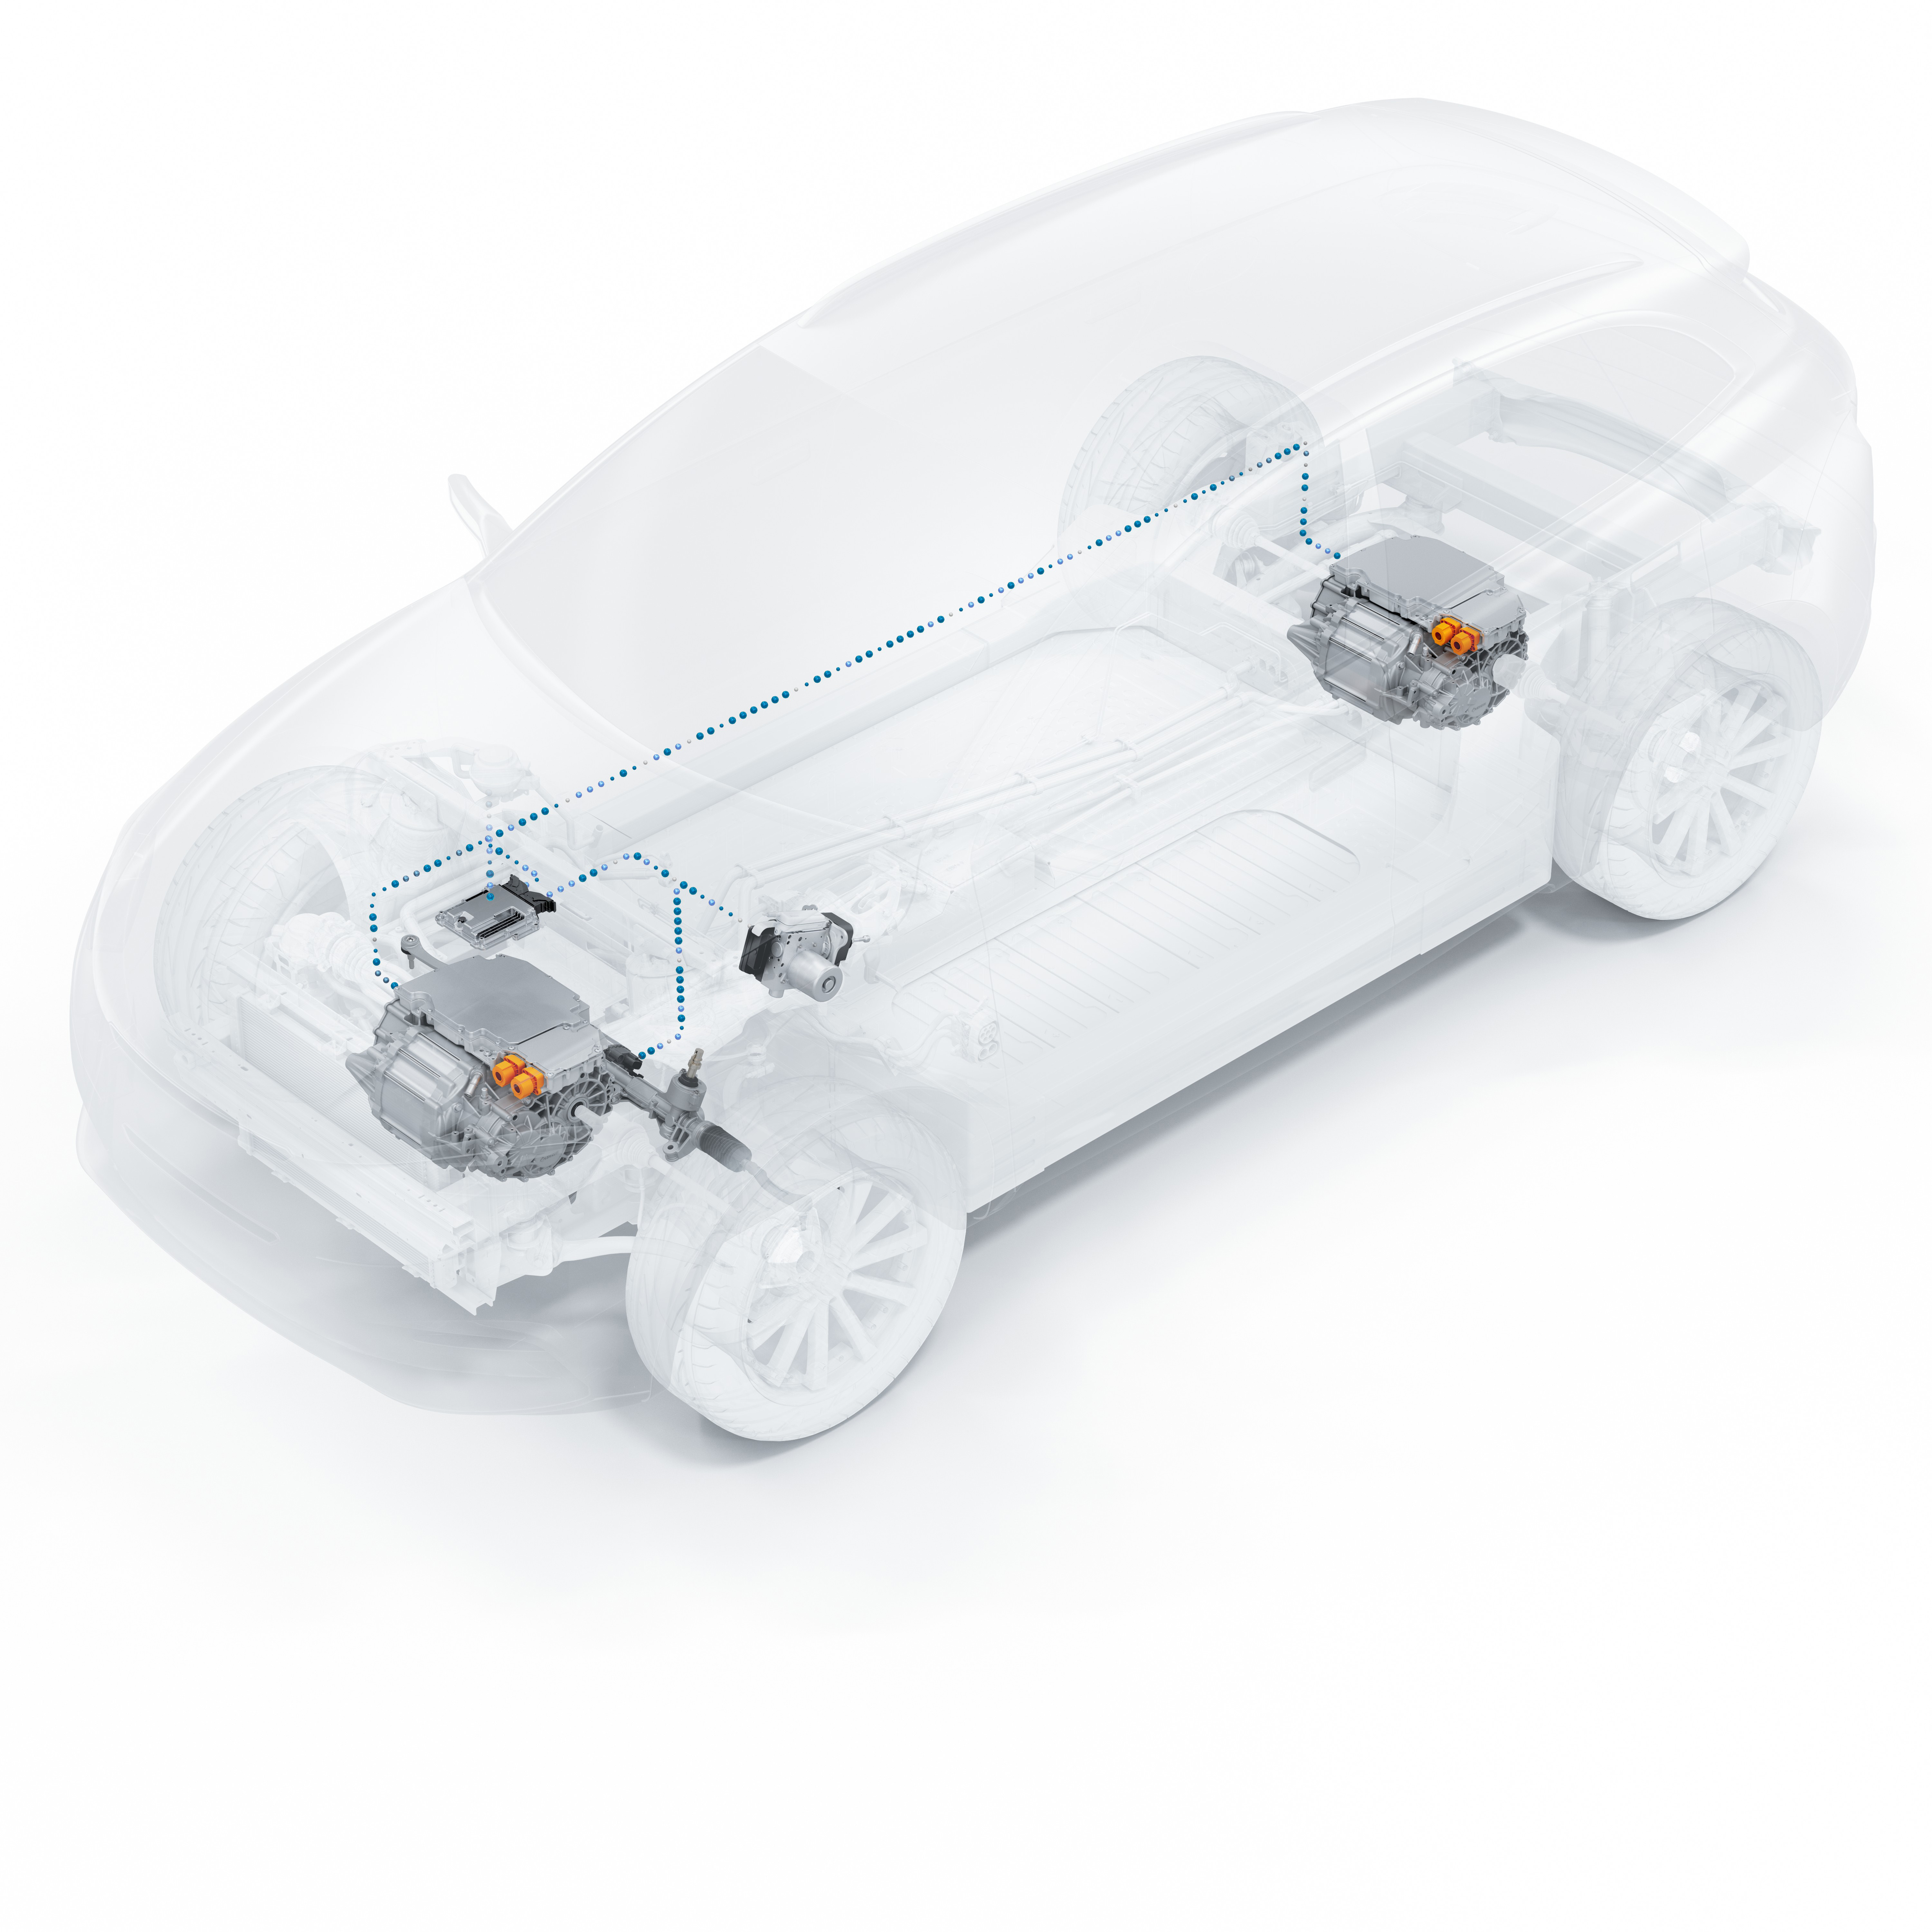 Bosch presents electrification, fuel cell and software-based solutions at NAIAS 2022